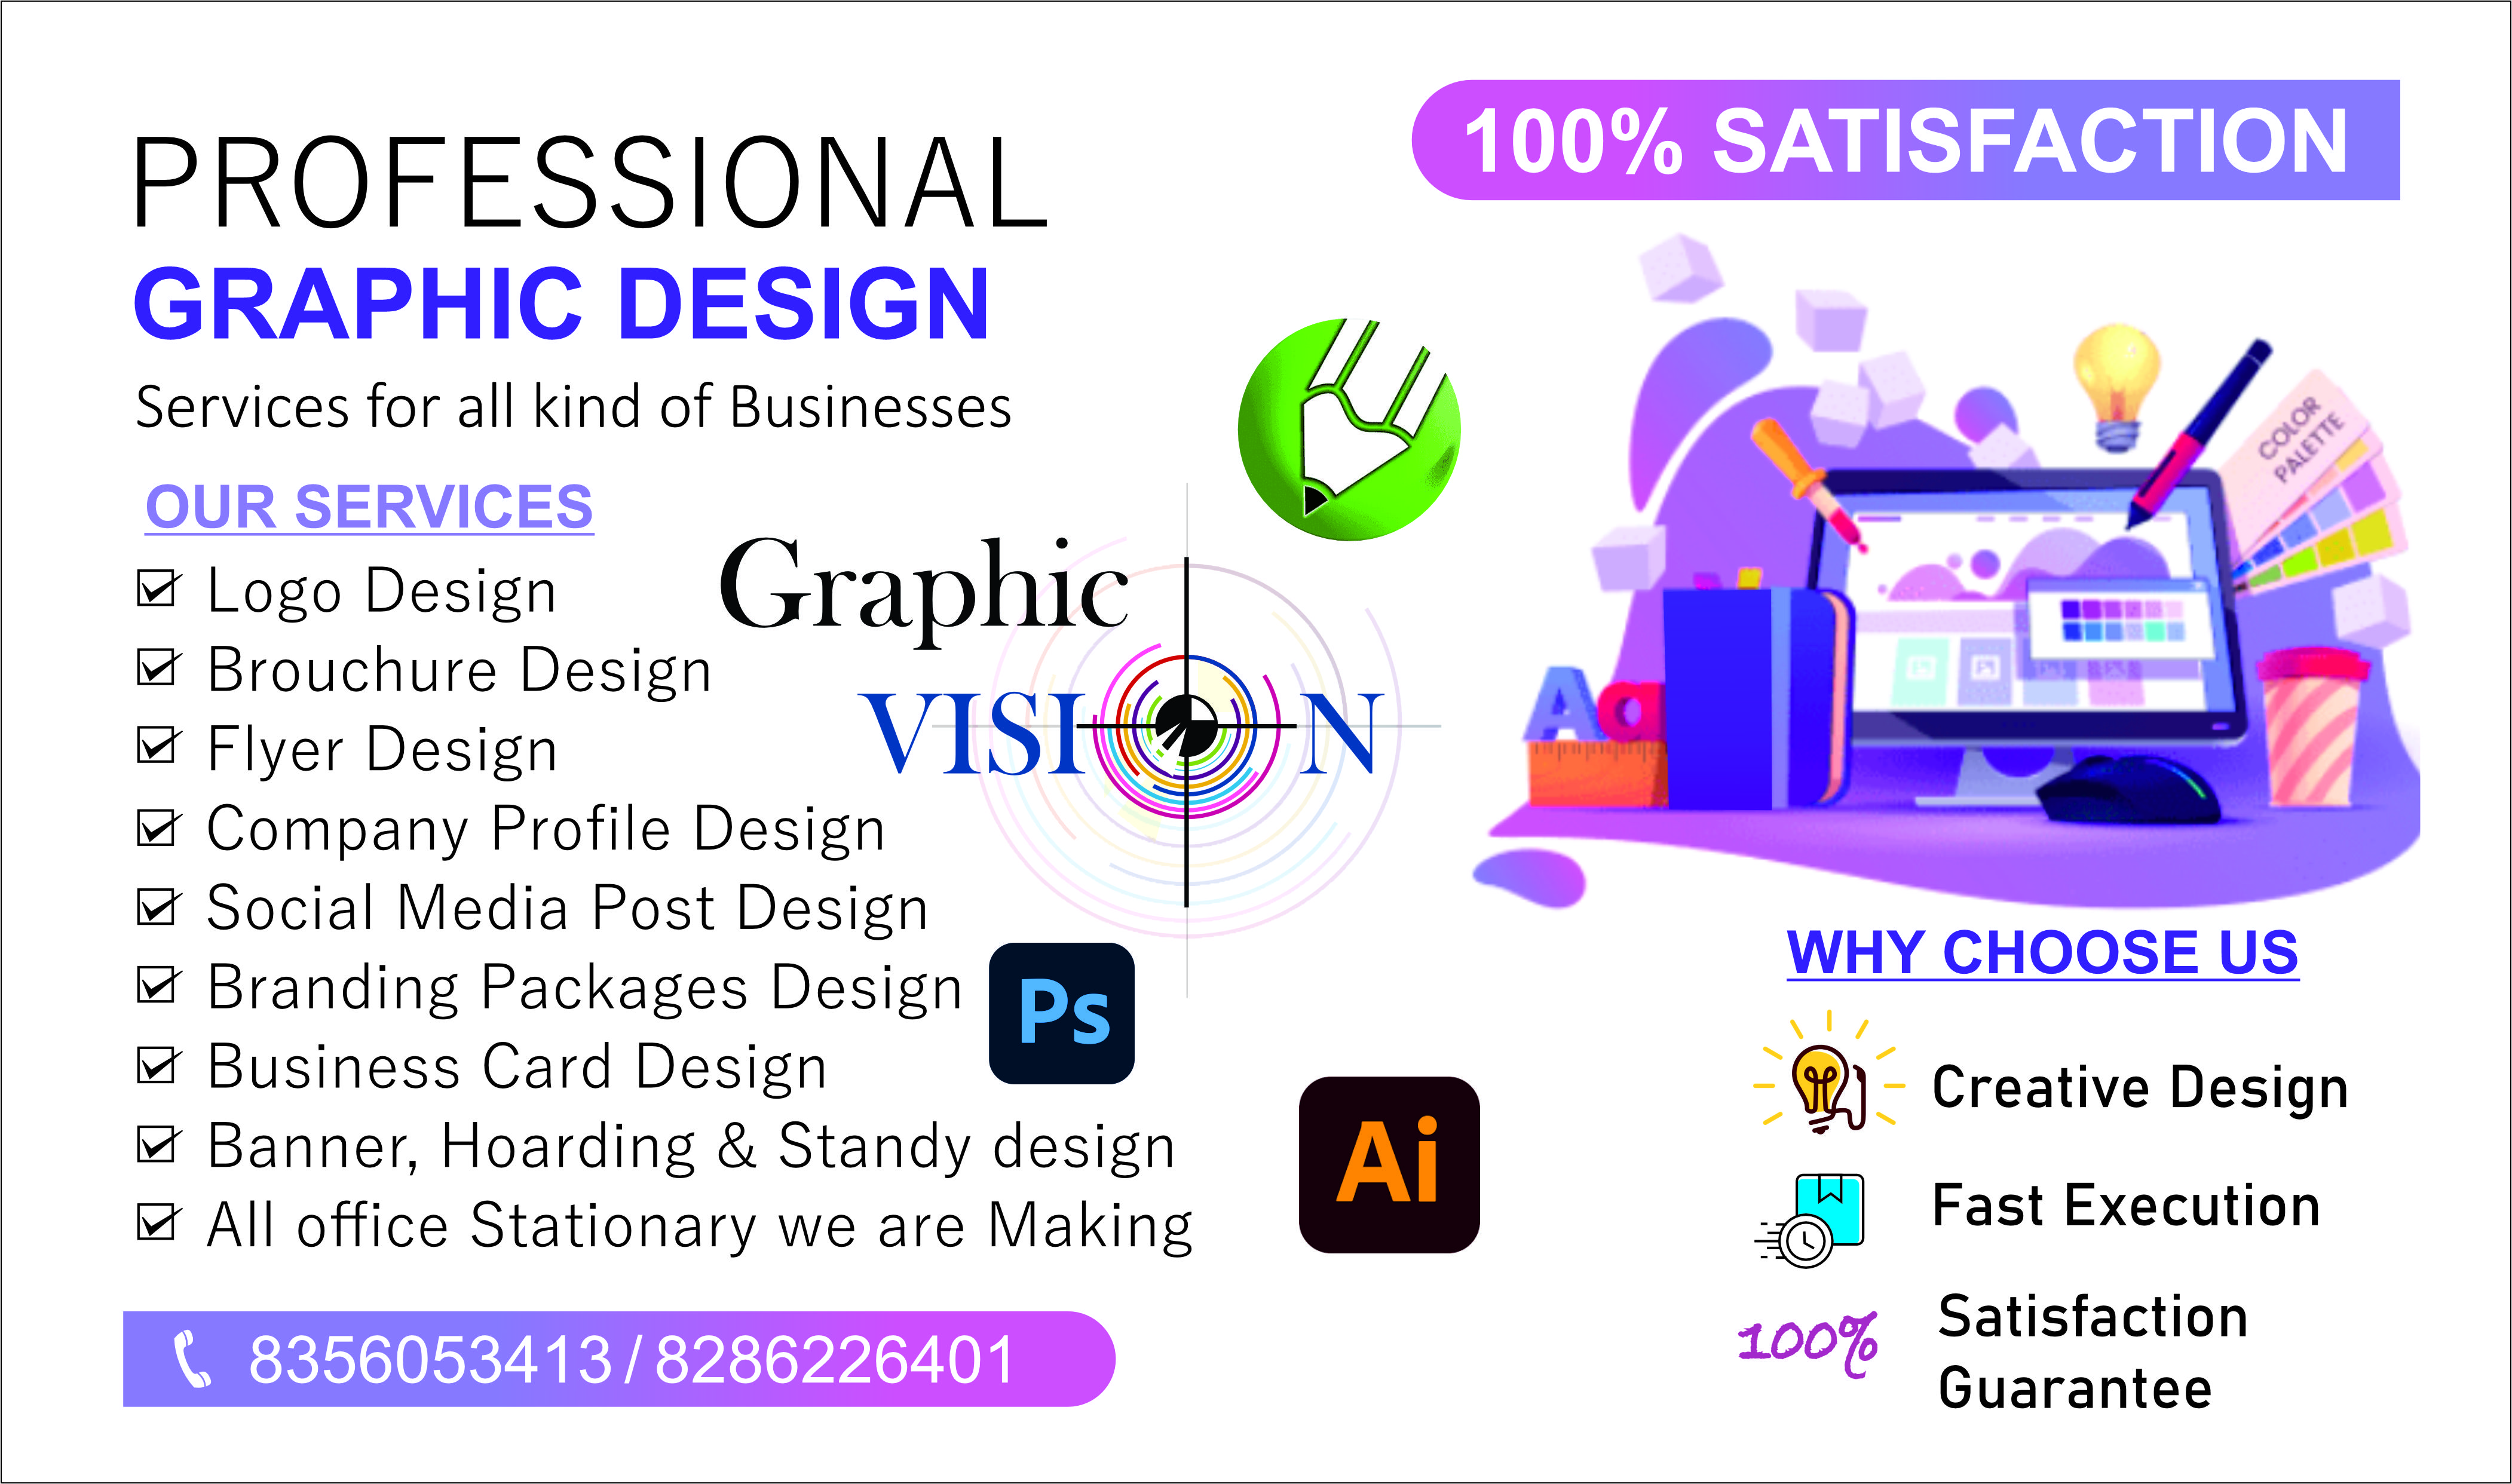 PROFESSIONAL

GRAPHIC DESIGN

Services for all kind of Businesses
OUR SERVICES
M Logo Design Graphic
M Brouchure Design 7R
M Flyer Design VISK®)
M Company Profile Design

M Social Media Post Design
M Branding Packages Design
M Business Card Design

M Banner, Hoarding & Standy design
M All office Stationary we are Making

   

WHY CHOOSE US

 

&) Creative Design

 

oO Fast Execution

100% Satisfaction
Guarantee

\ 8356053413/8286226401